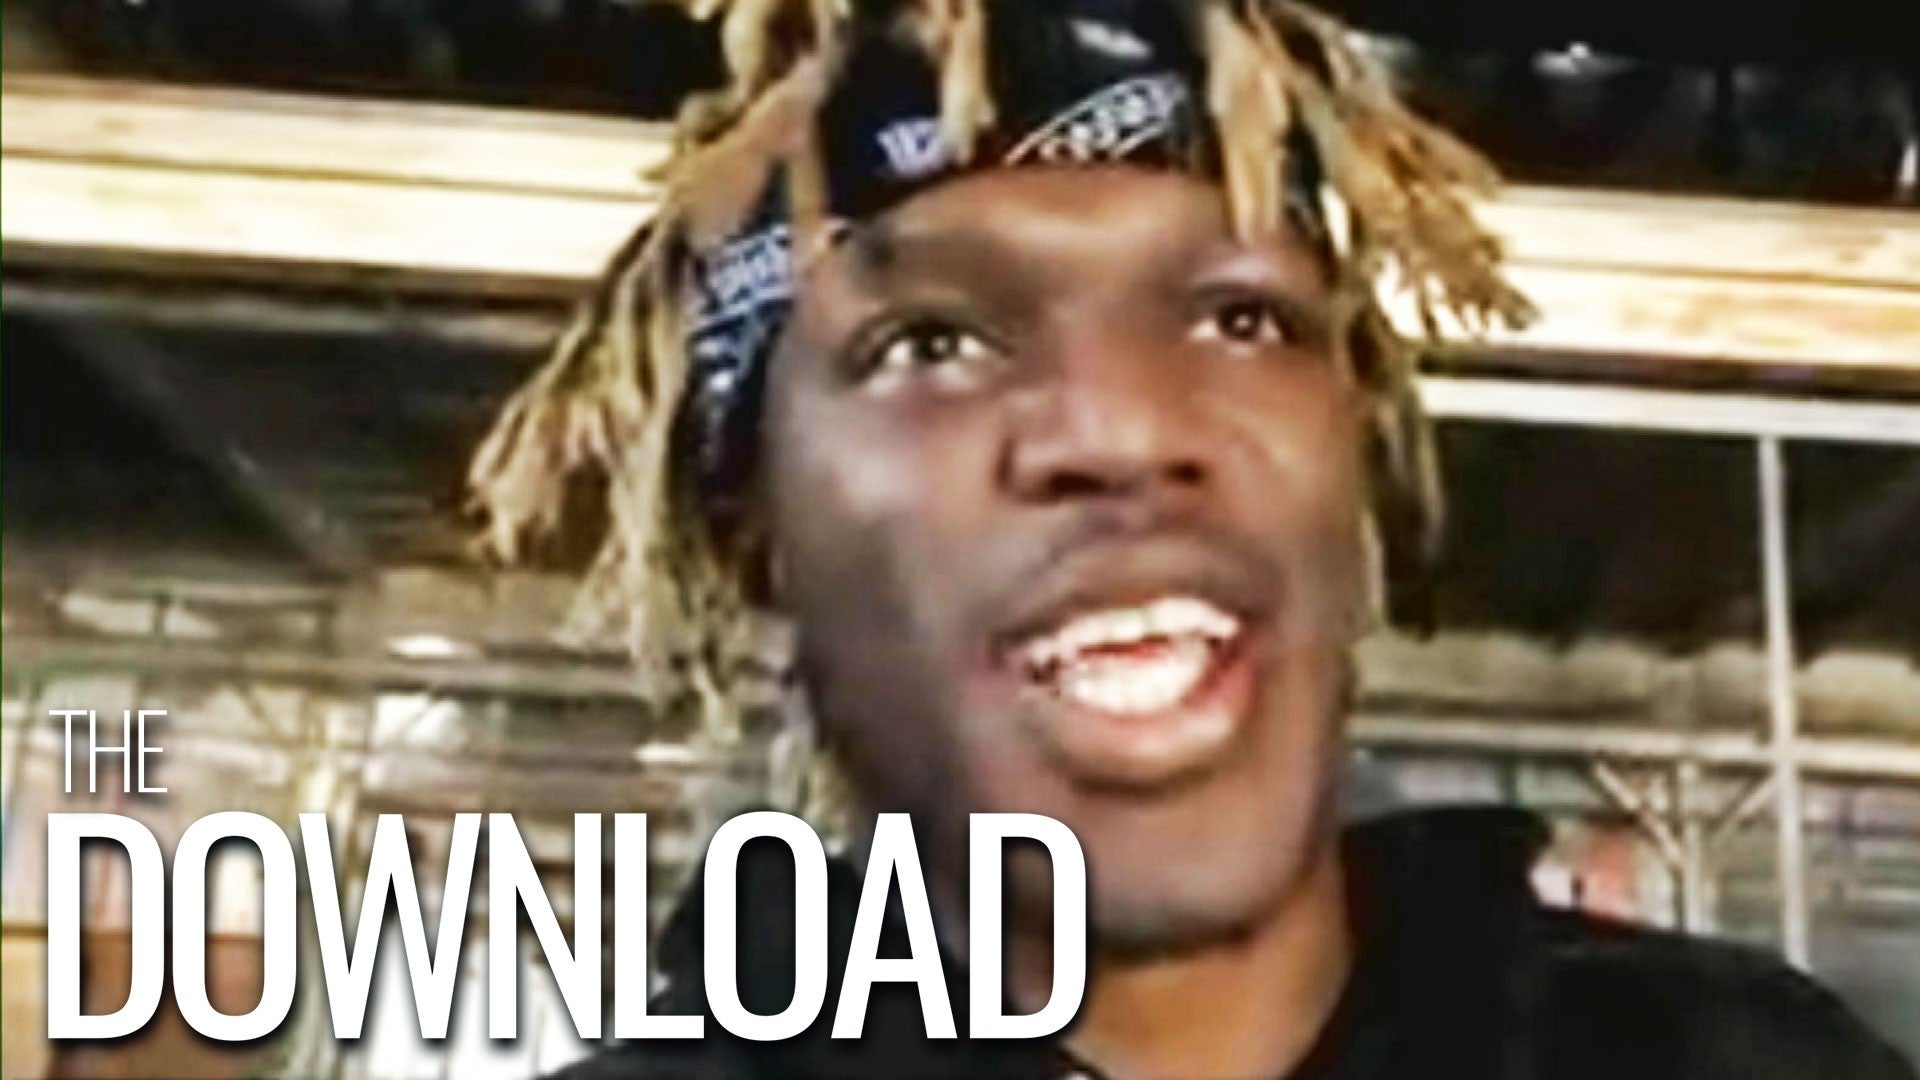 Ksi Rick Ross S X And Lil Baby Team Up For Down Like That - roblox pictur ids for logan and jake paul youtube